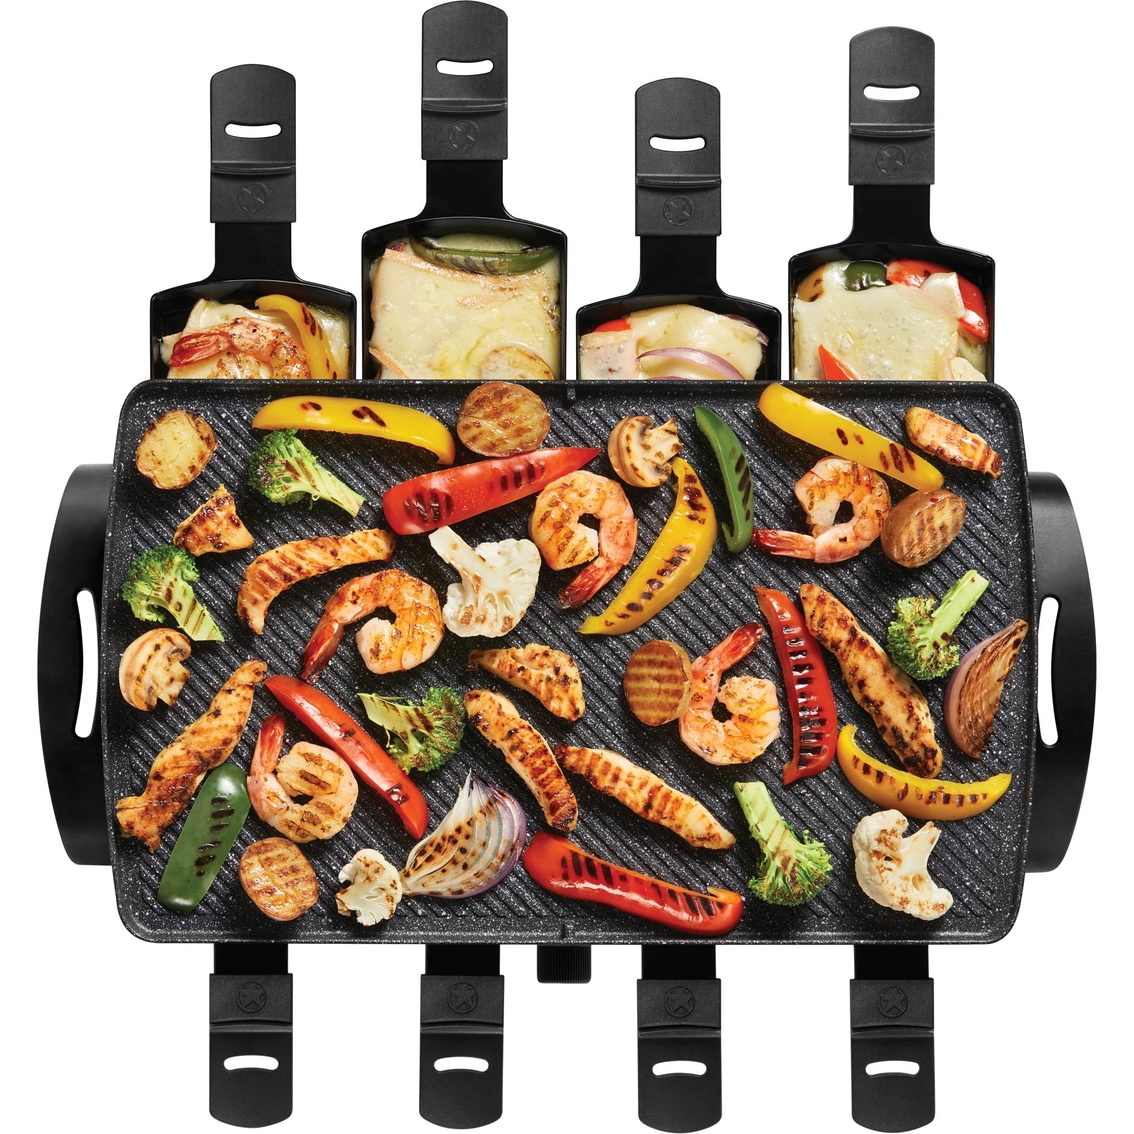 Starfrit The Rock Raclette Party Grill Set - Image 2 of 6